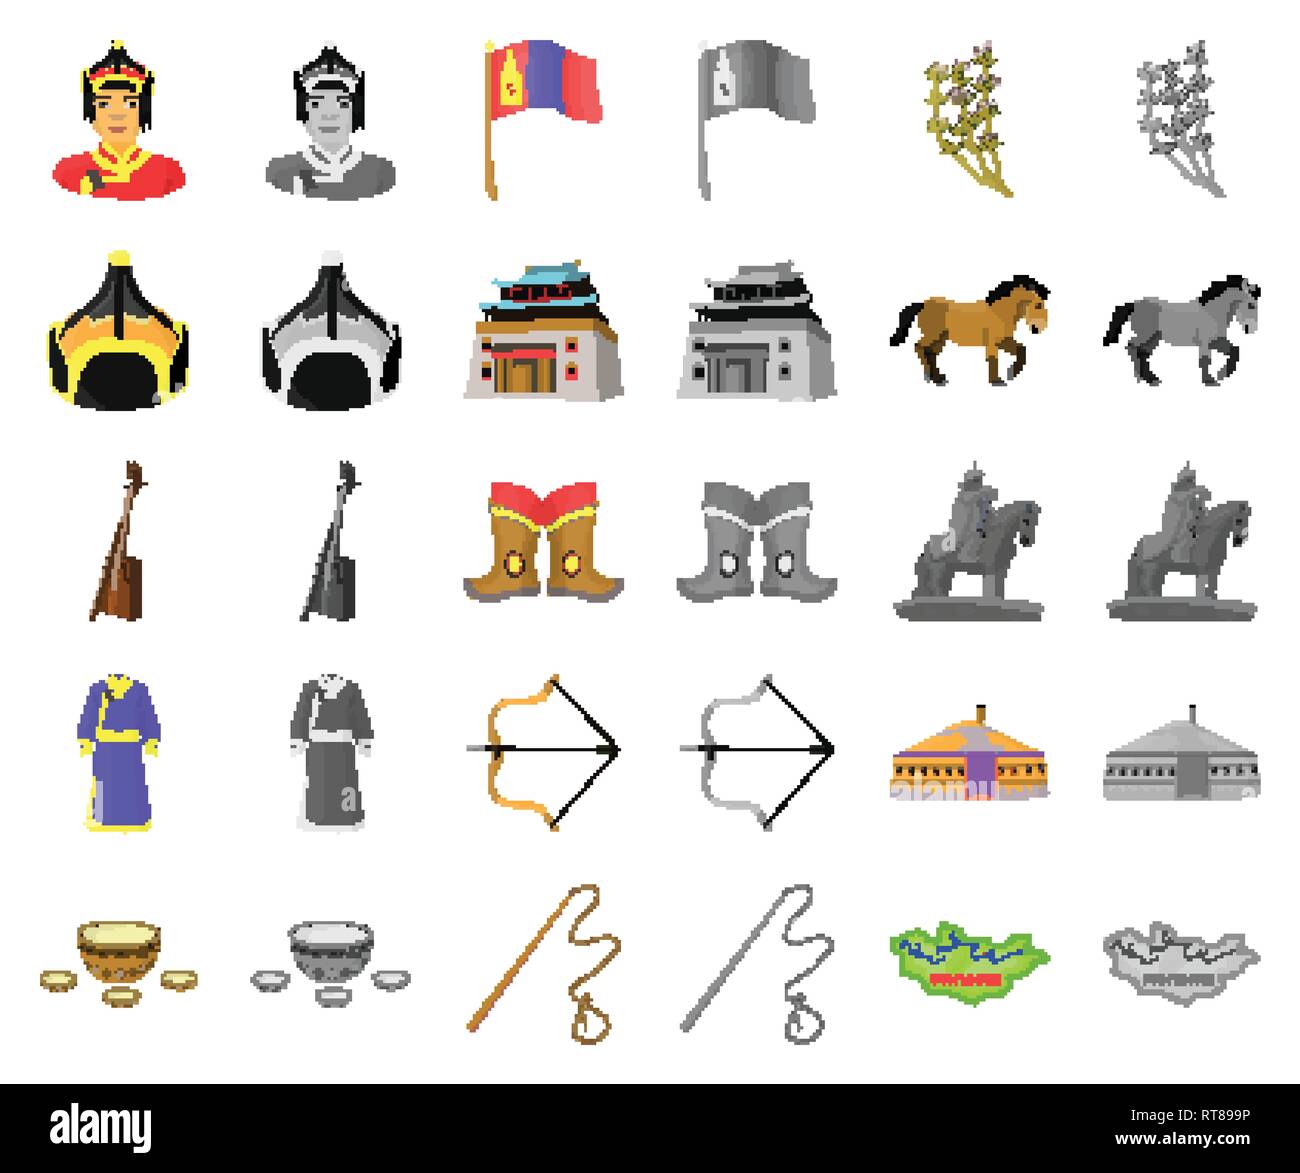 arms,arrow,belt,bow,buddhism,building,cartoon,monochrom,cashmere,coat,collection,country,culture,flag,flower,fur,genghis,gutuly,headdress,horse,hudak,icon,illustration,instrument,khan,kialis,kumis,landmark,leather,map,monastery,mongol,mongolia,monument,musical,nature,religion,robe,set,shoes,sign,spear,temple,territory,tradition,travel,vector,whip,wool,yurt Vector Vectors , Stock Vector